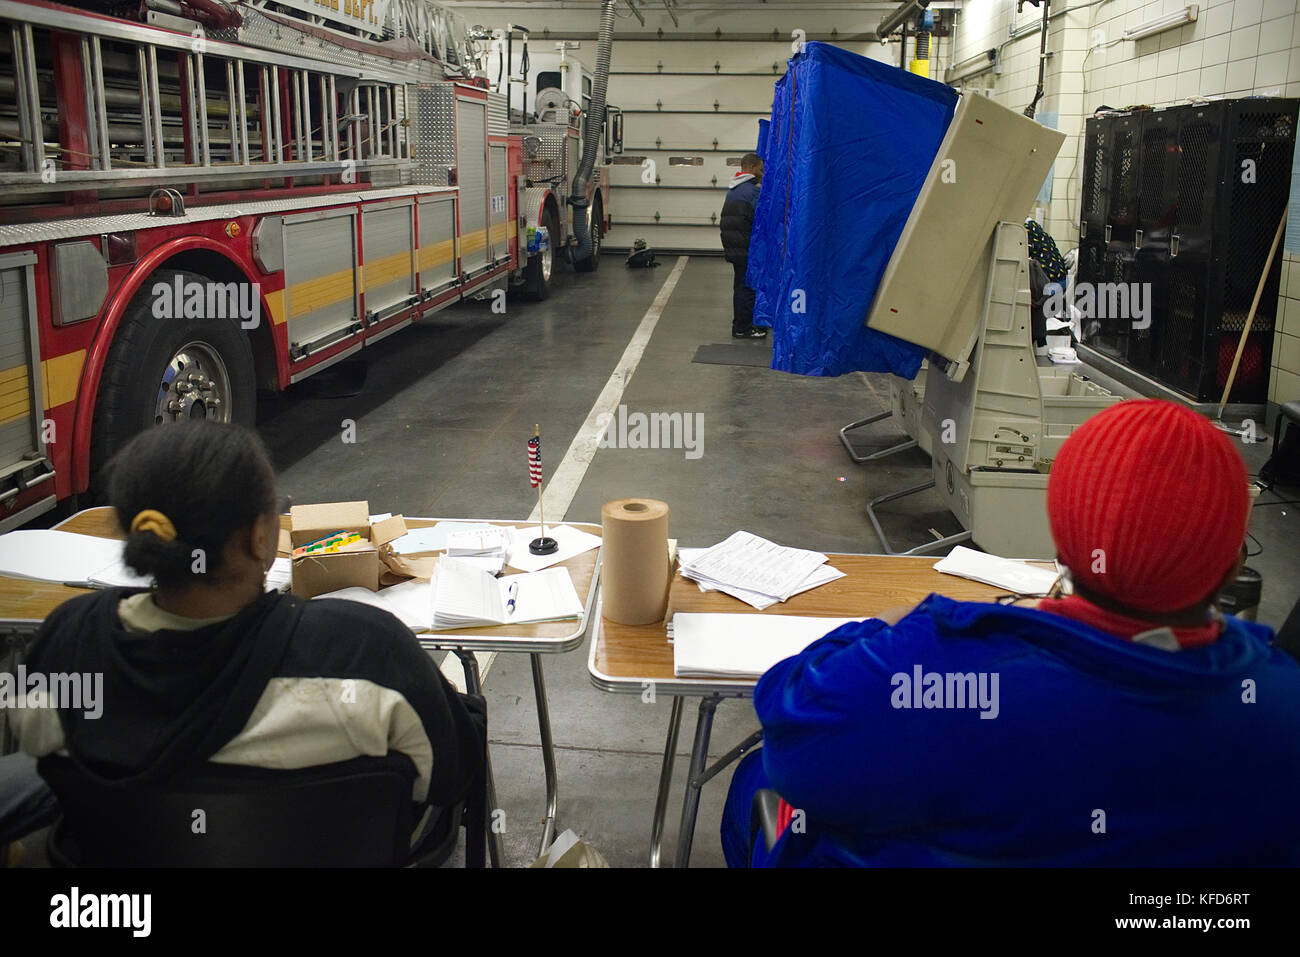 Electronic voting machines stand next to a fire truck of the Philadelphia Fire Dept., on Election Day at a Philadelphia, PA poling station. Stock Photo